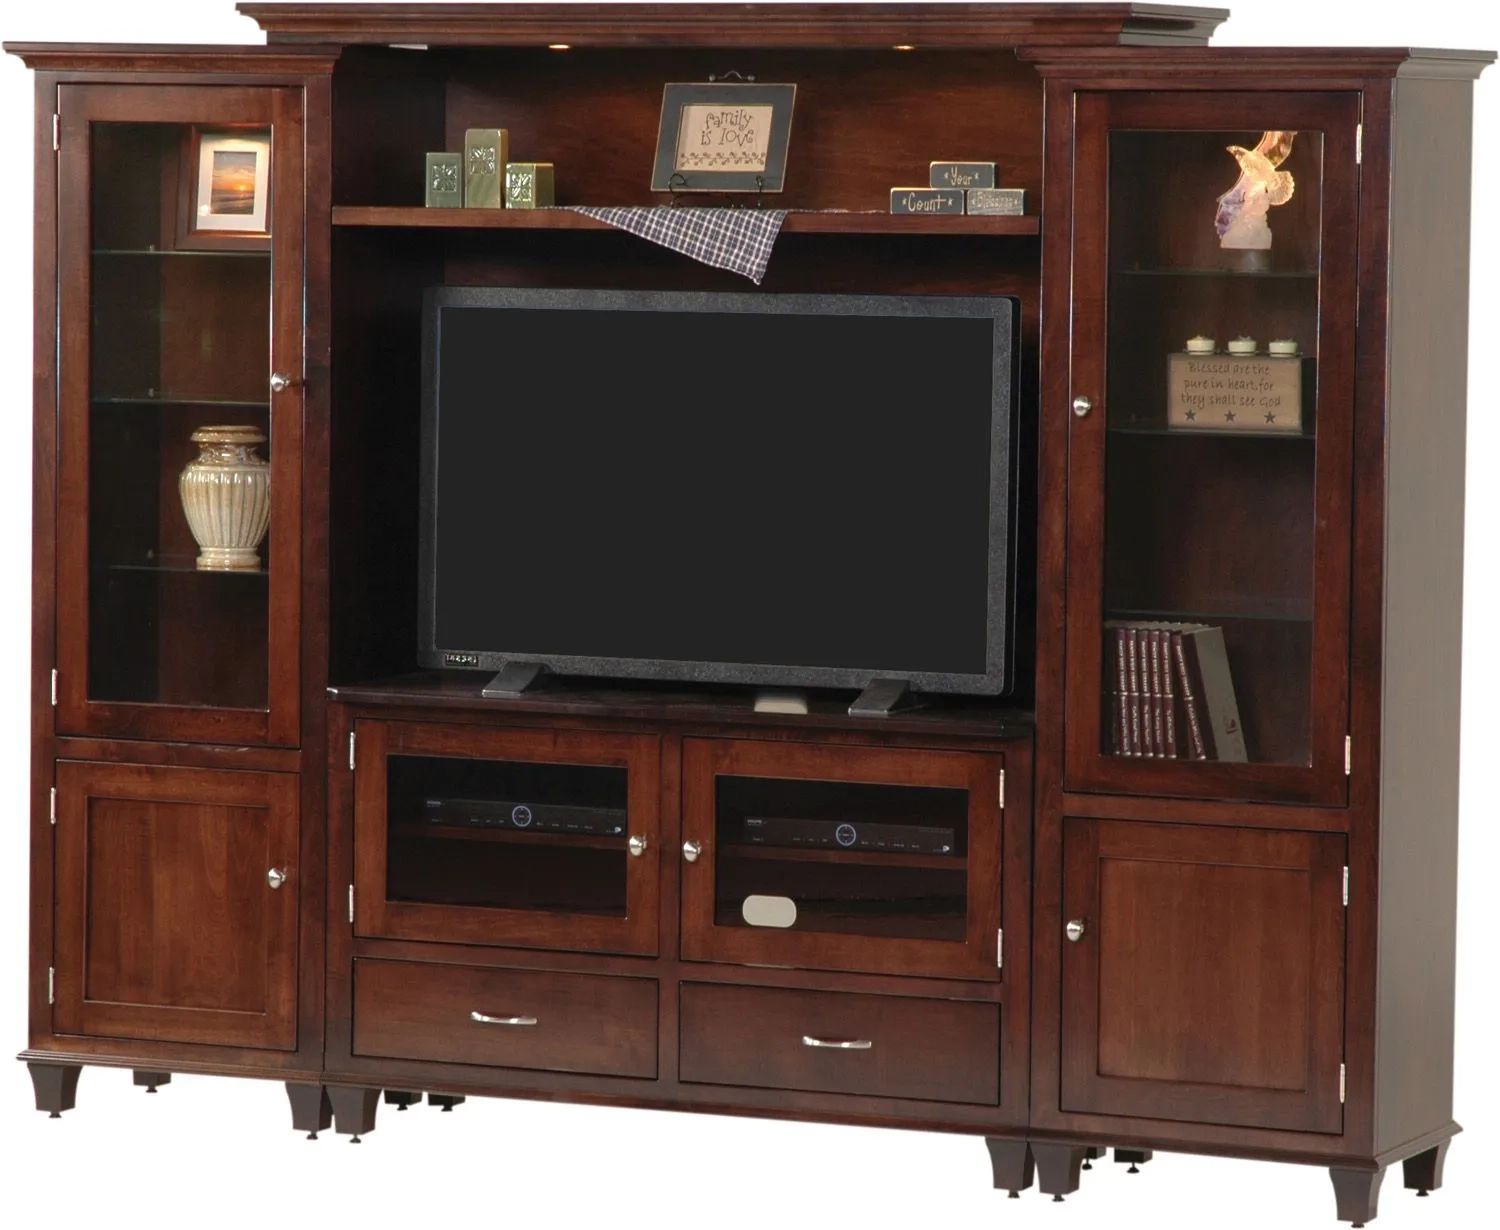 Bb400 Bourten Bridge Entertainment Wall Unit | Scenic Hills Furniture Intended For Entertainment Units With Bridge (View 6 of 15)